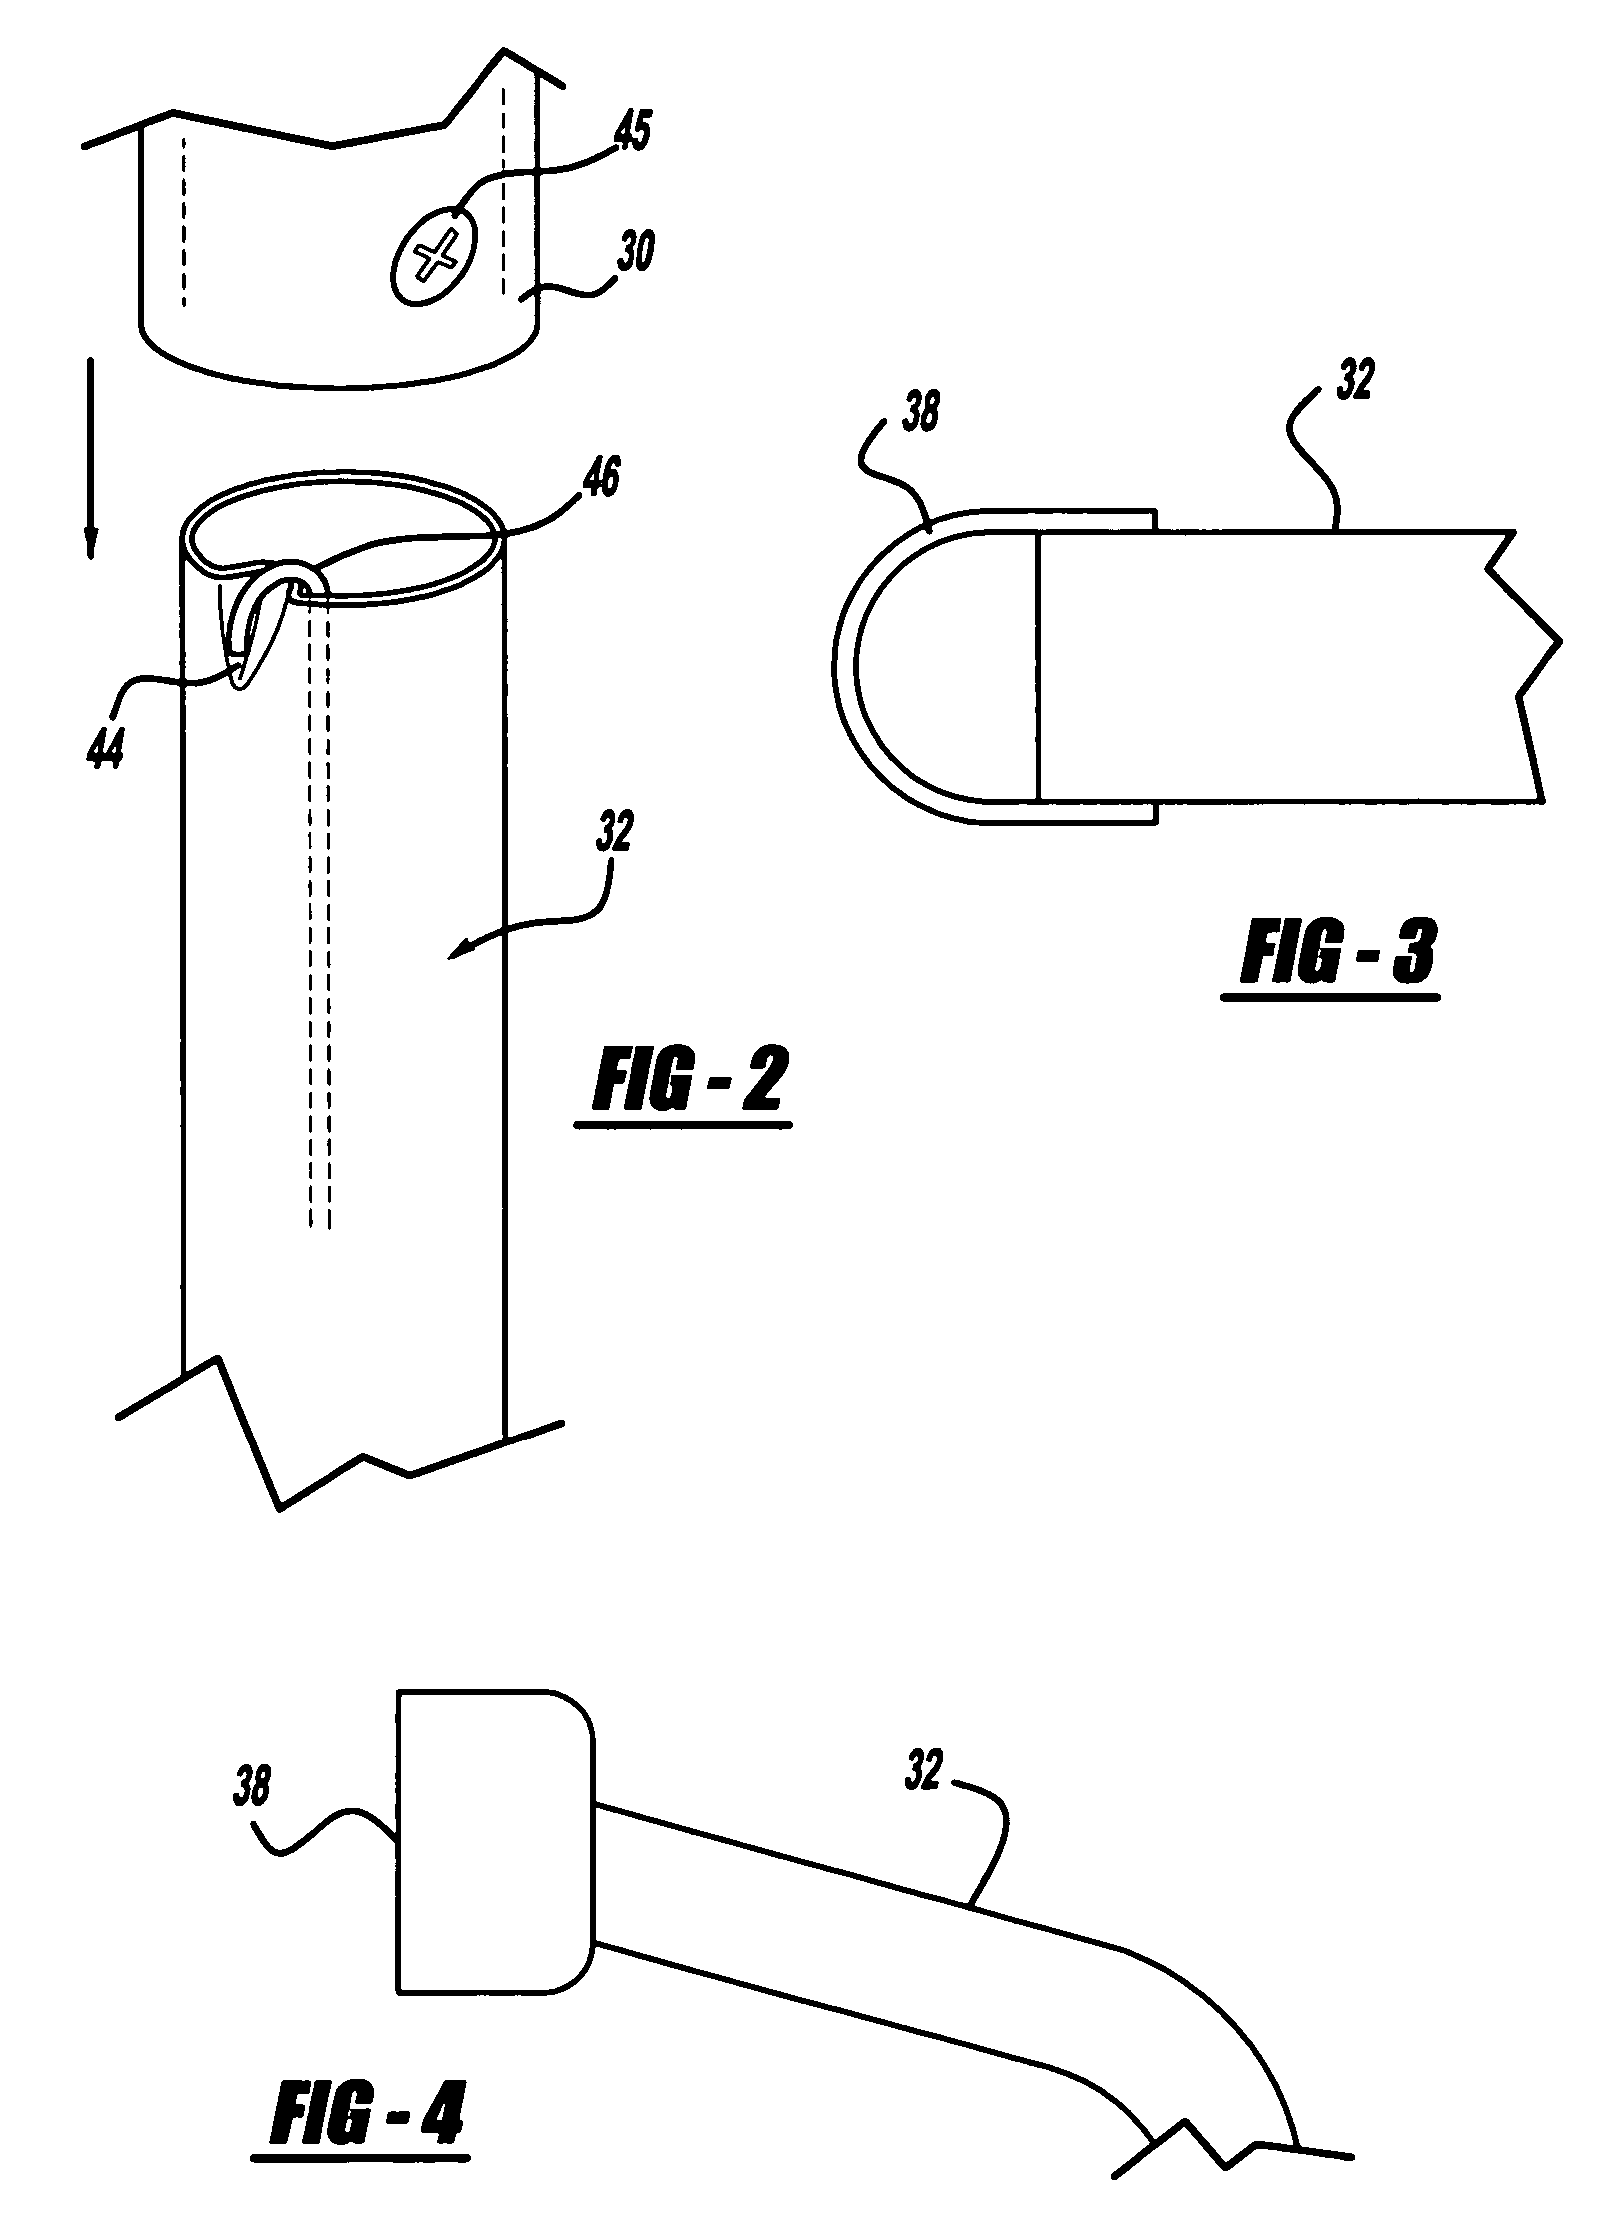 Venting arrangement for a vehicle refrigerator and related method